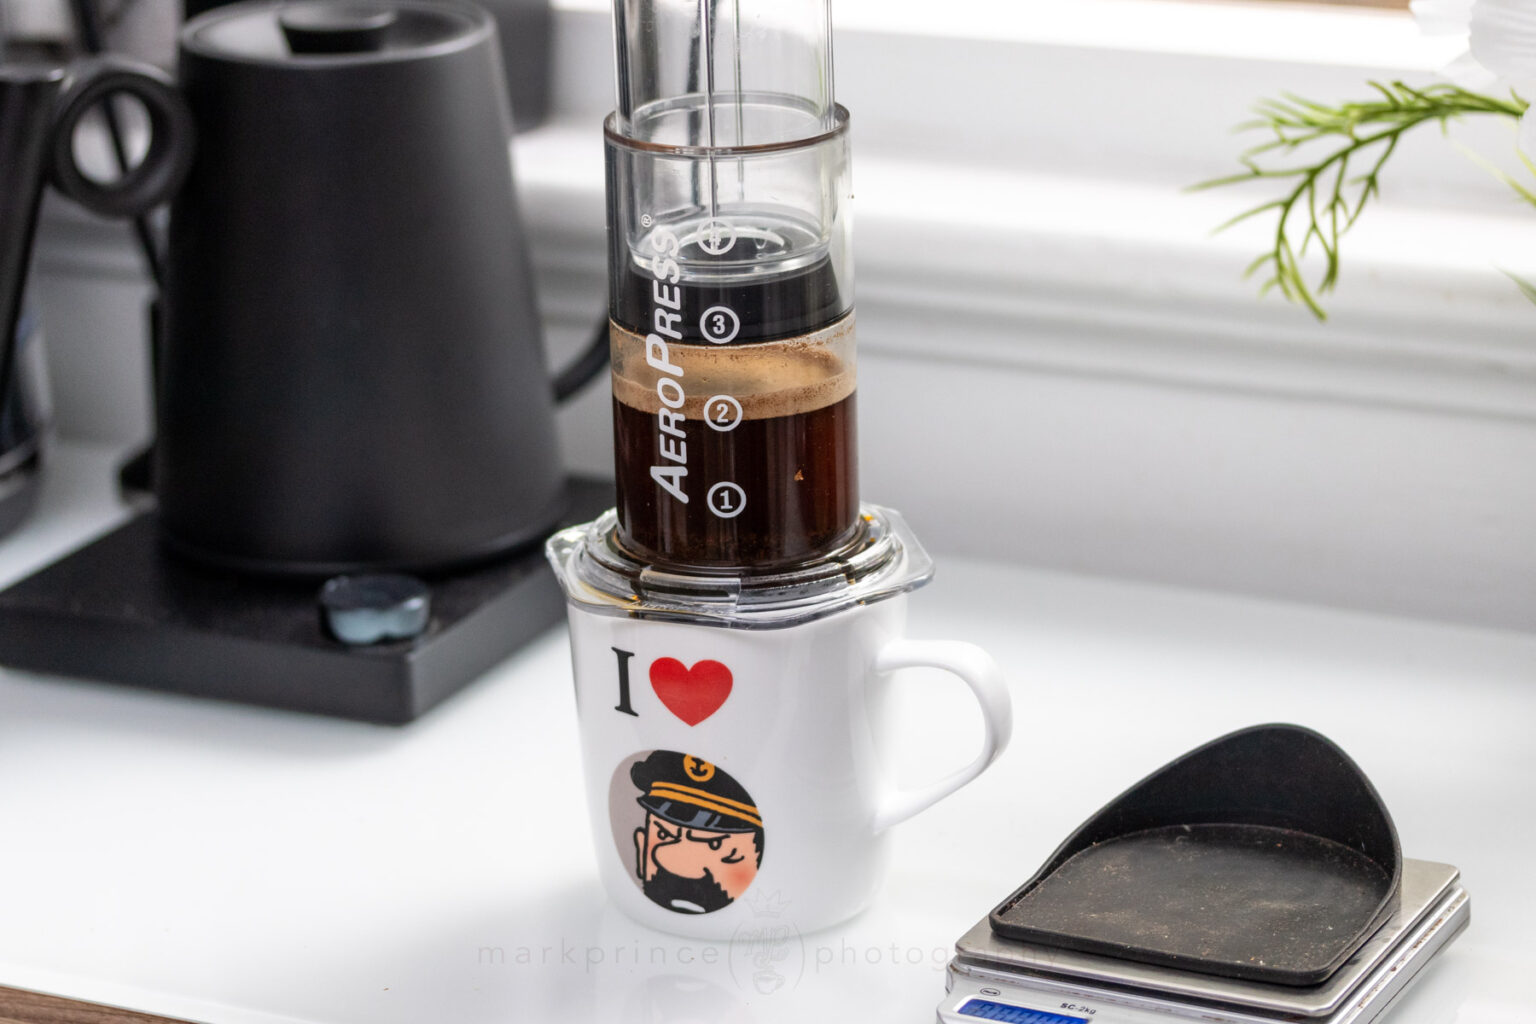 Brewing with the AeroPress